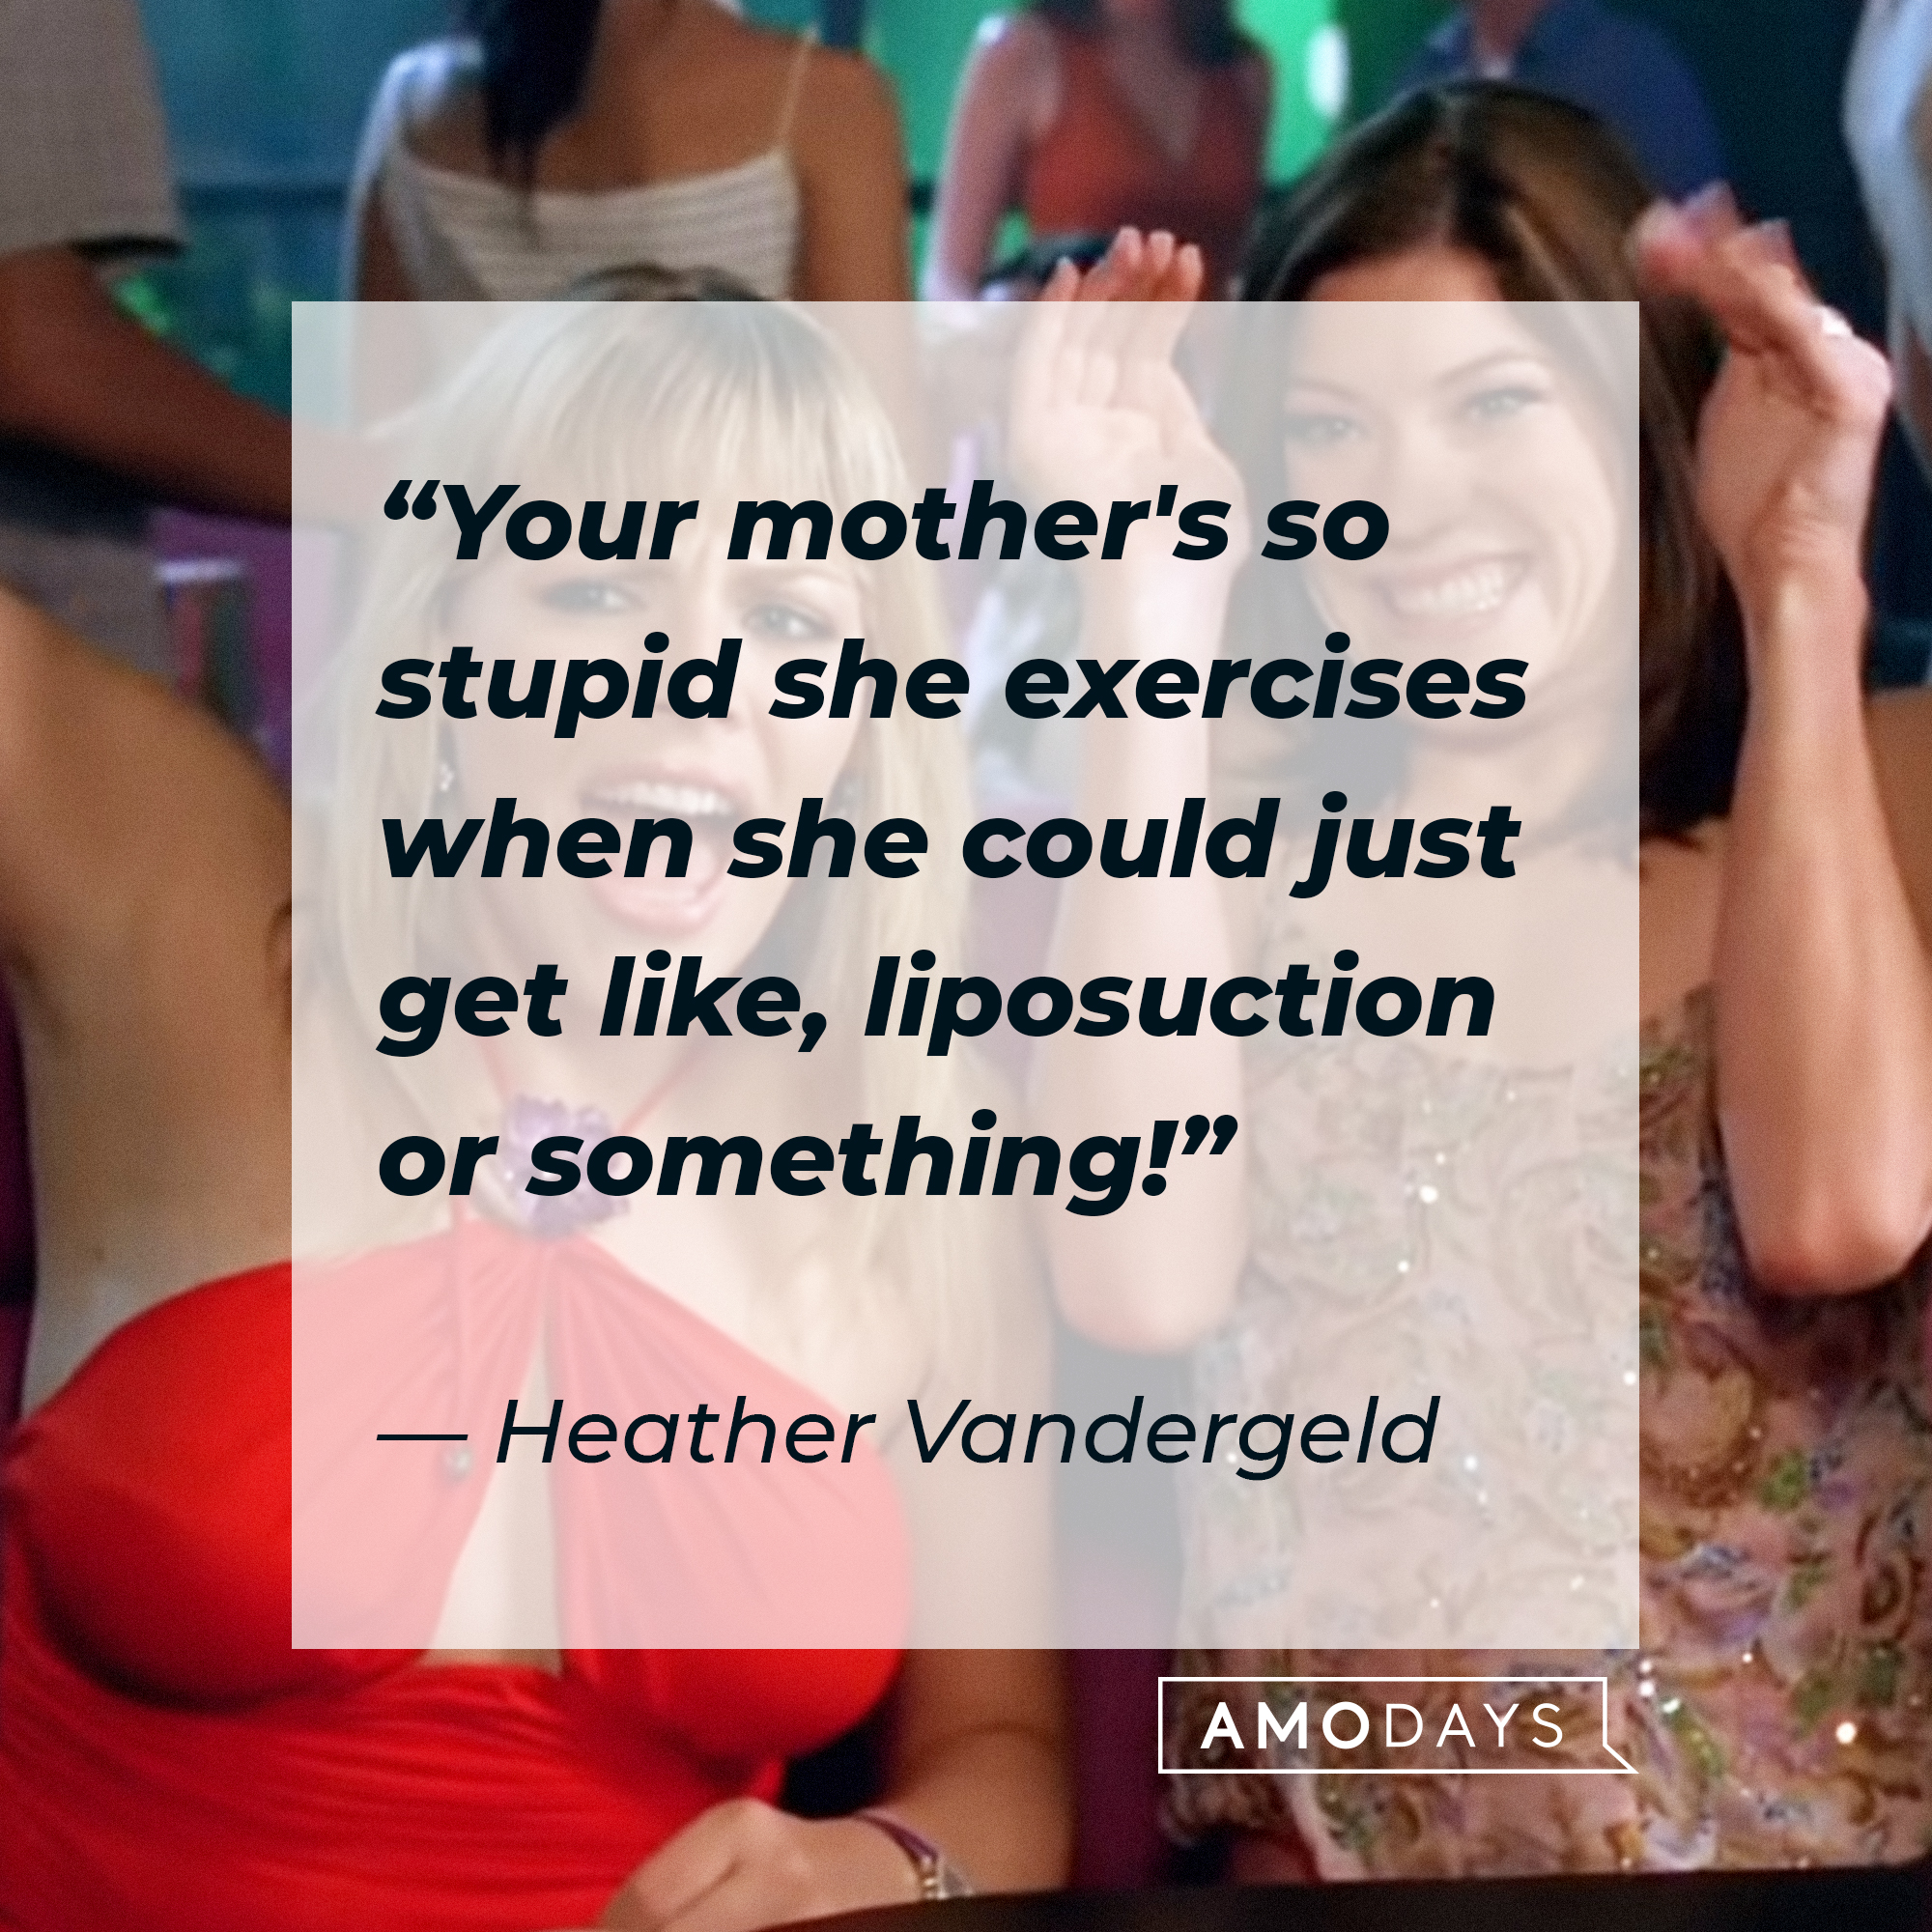 Two characters from “White Chicks” with Heather Vandergeld’s quote: “Your mother's so stupid she exercises when she could just get like, liposuction or something!”   | Source: Sony Pictures Entertainment